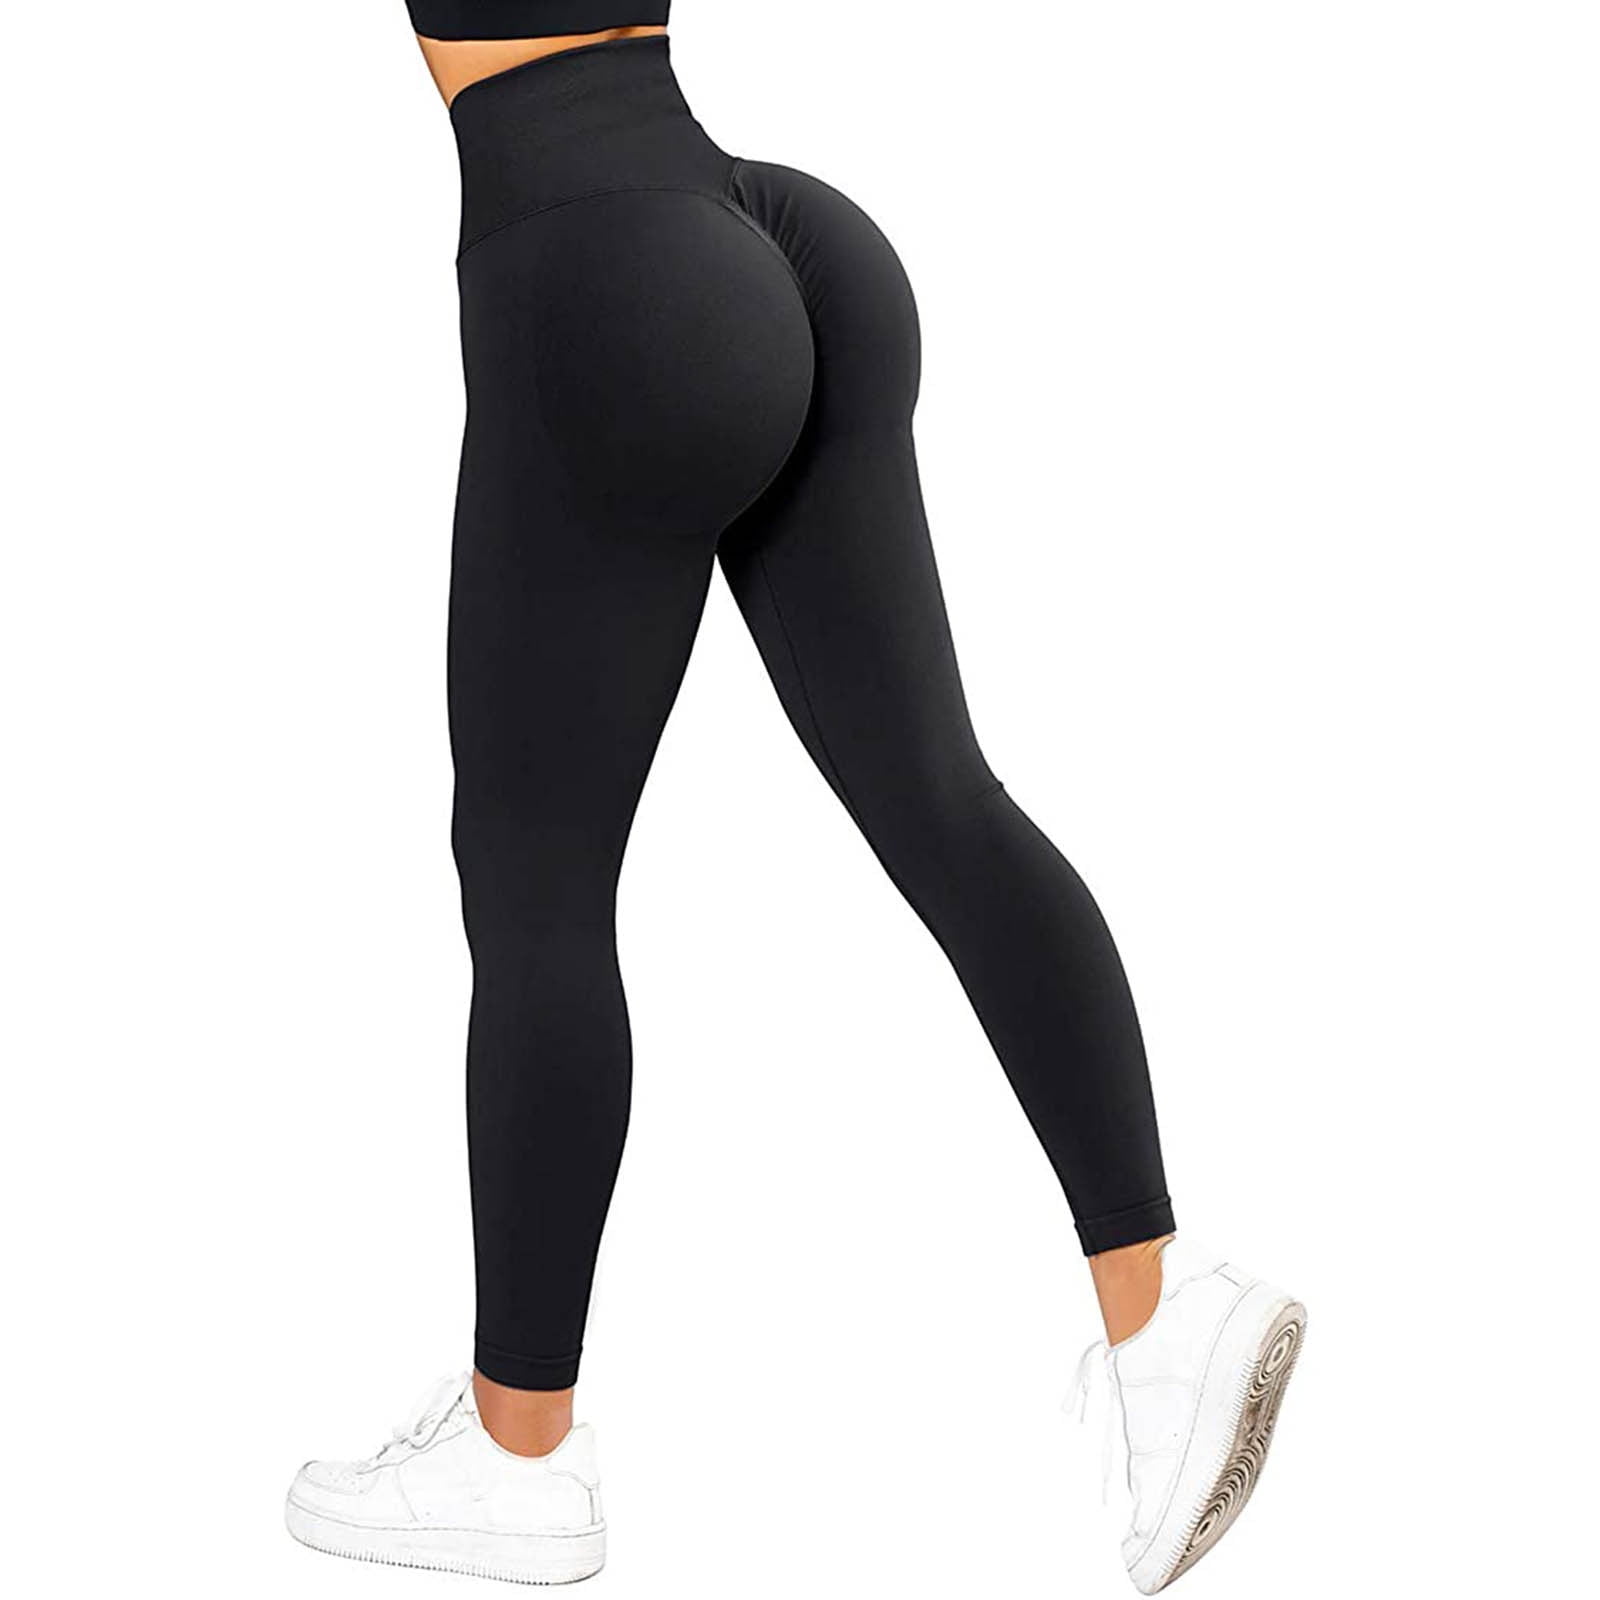 Amtdh Womens Yoga Pants for Women Sweatpants Stretch Athletic Butt Lift  Tights Workout Pants Tummy Control Workout Pants Slimming High Waist  Fitness Running Yoga Leggings for Women Black M 